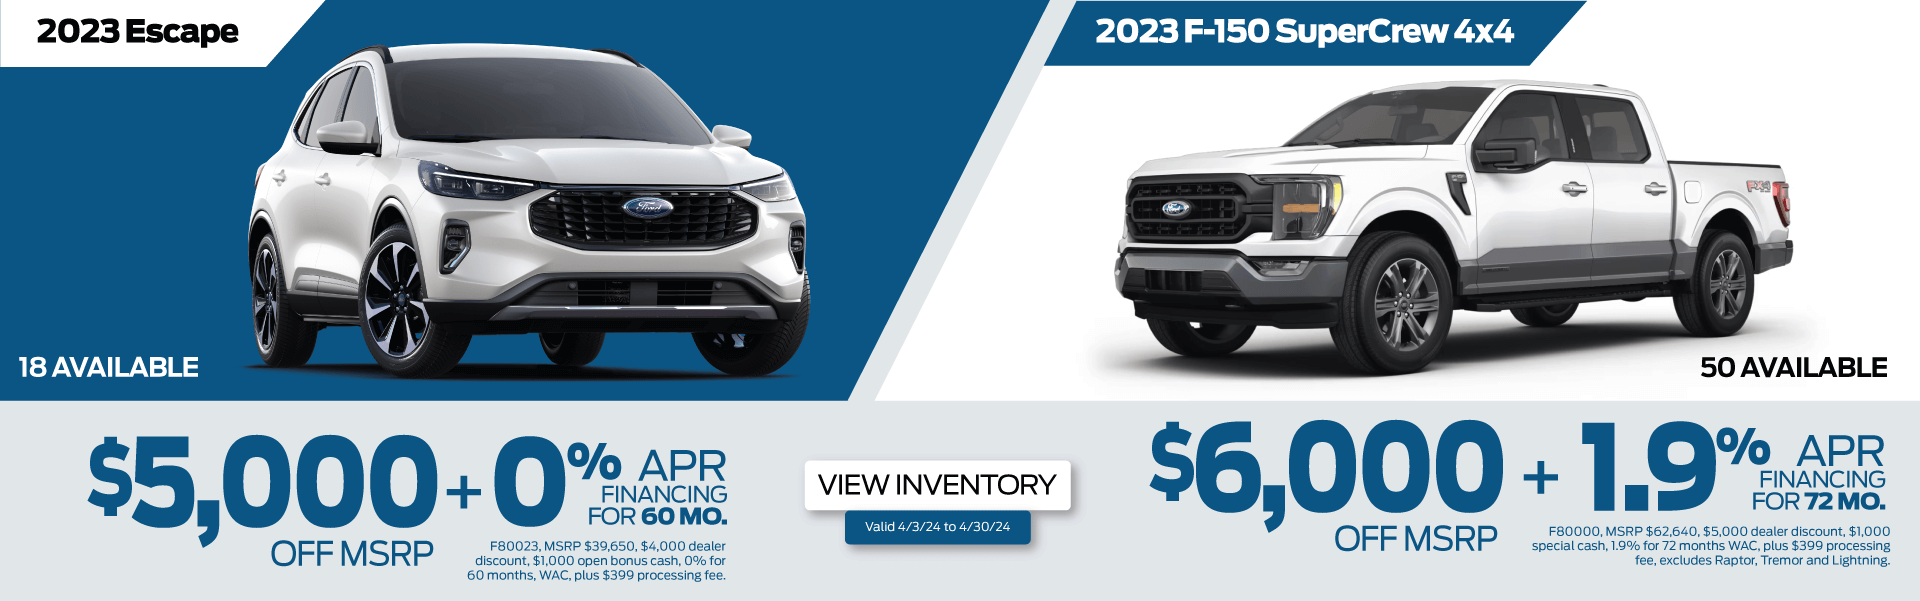 Discount and Financing on 2023 Escape and F-150 Supercrew